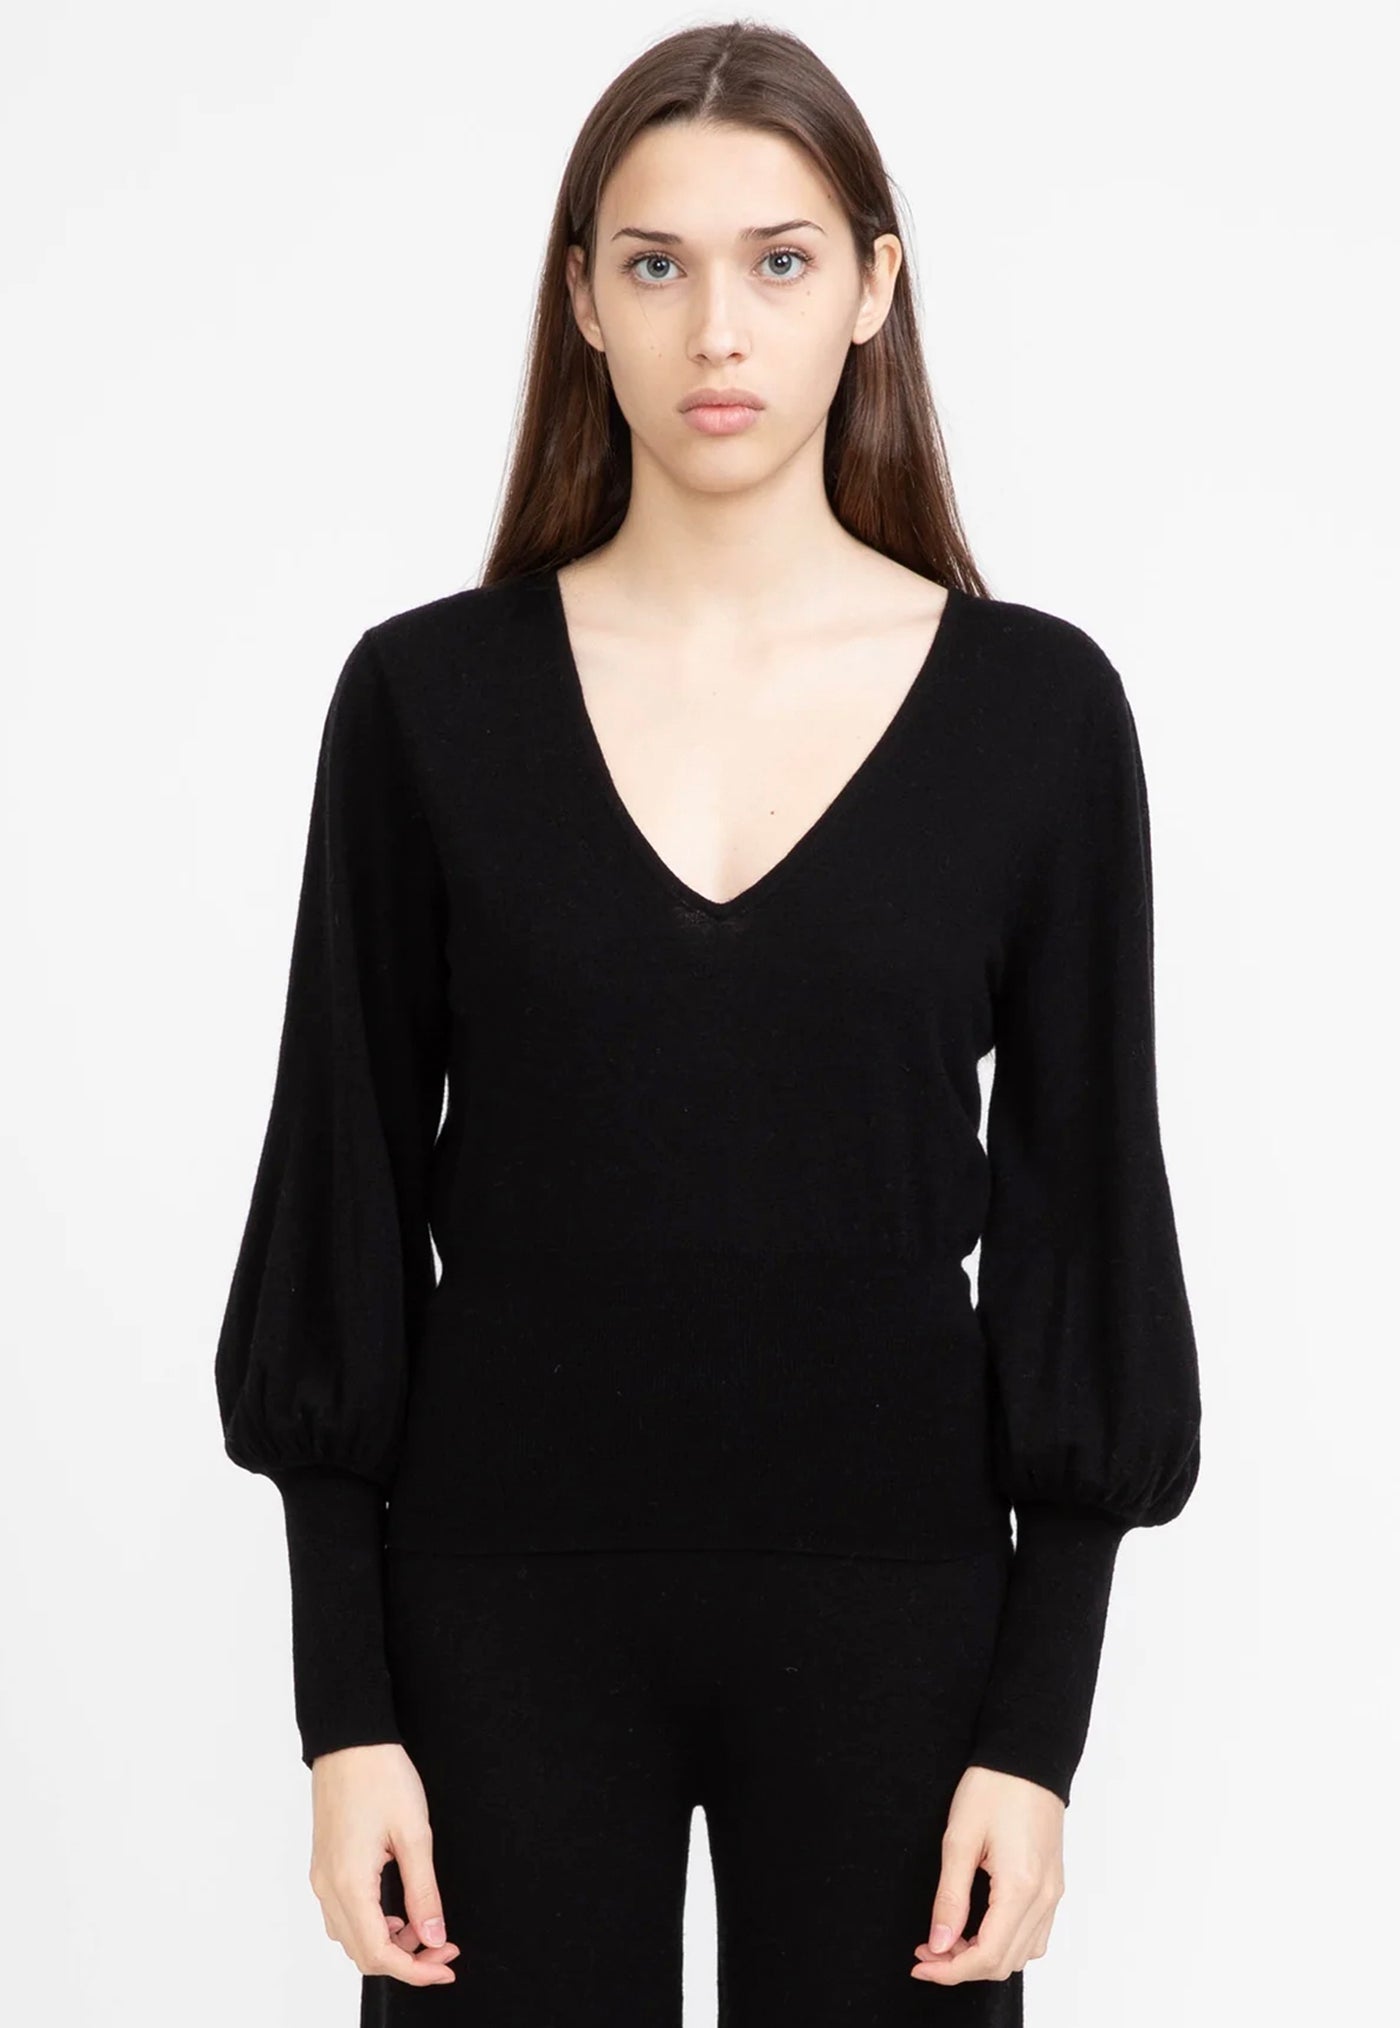 N.111 Wool/Cashmere Low V Sweater - Black sold by Angel Divine